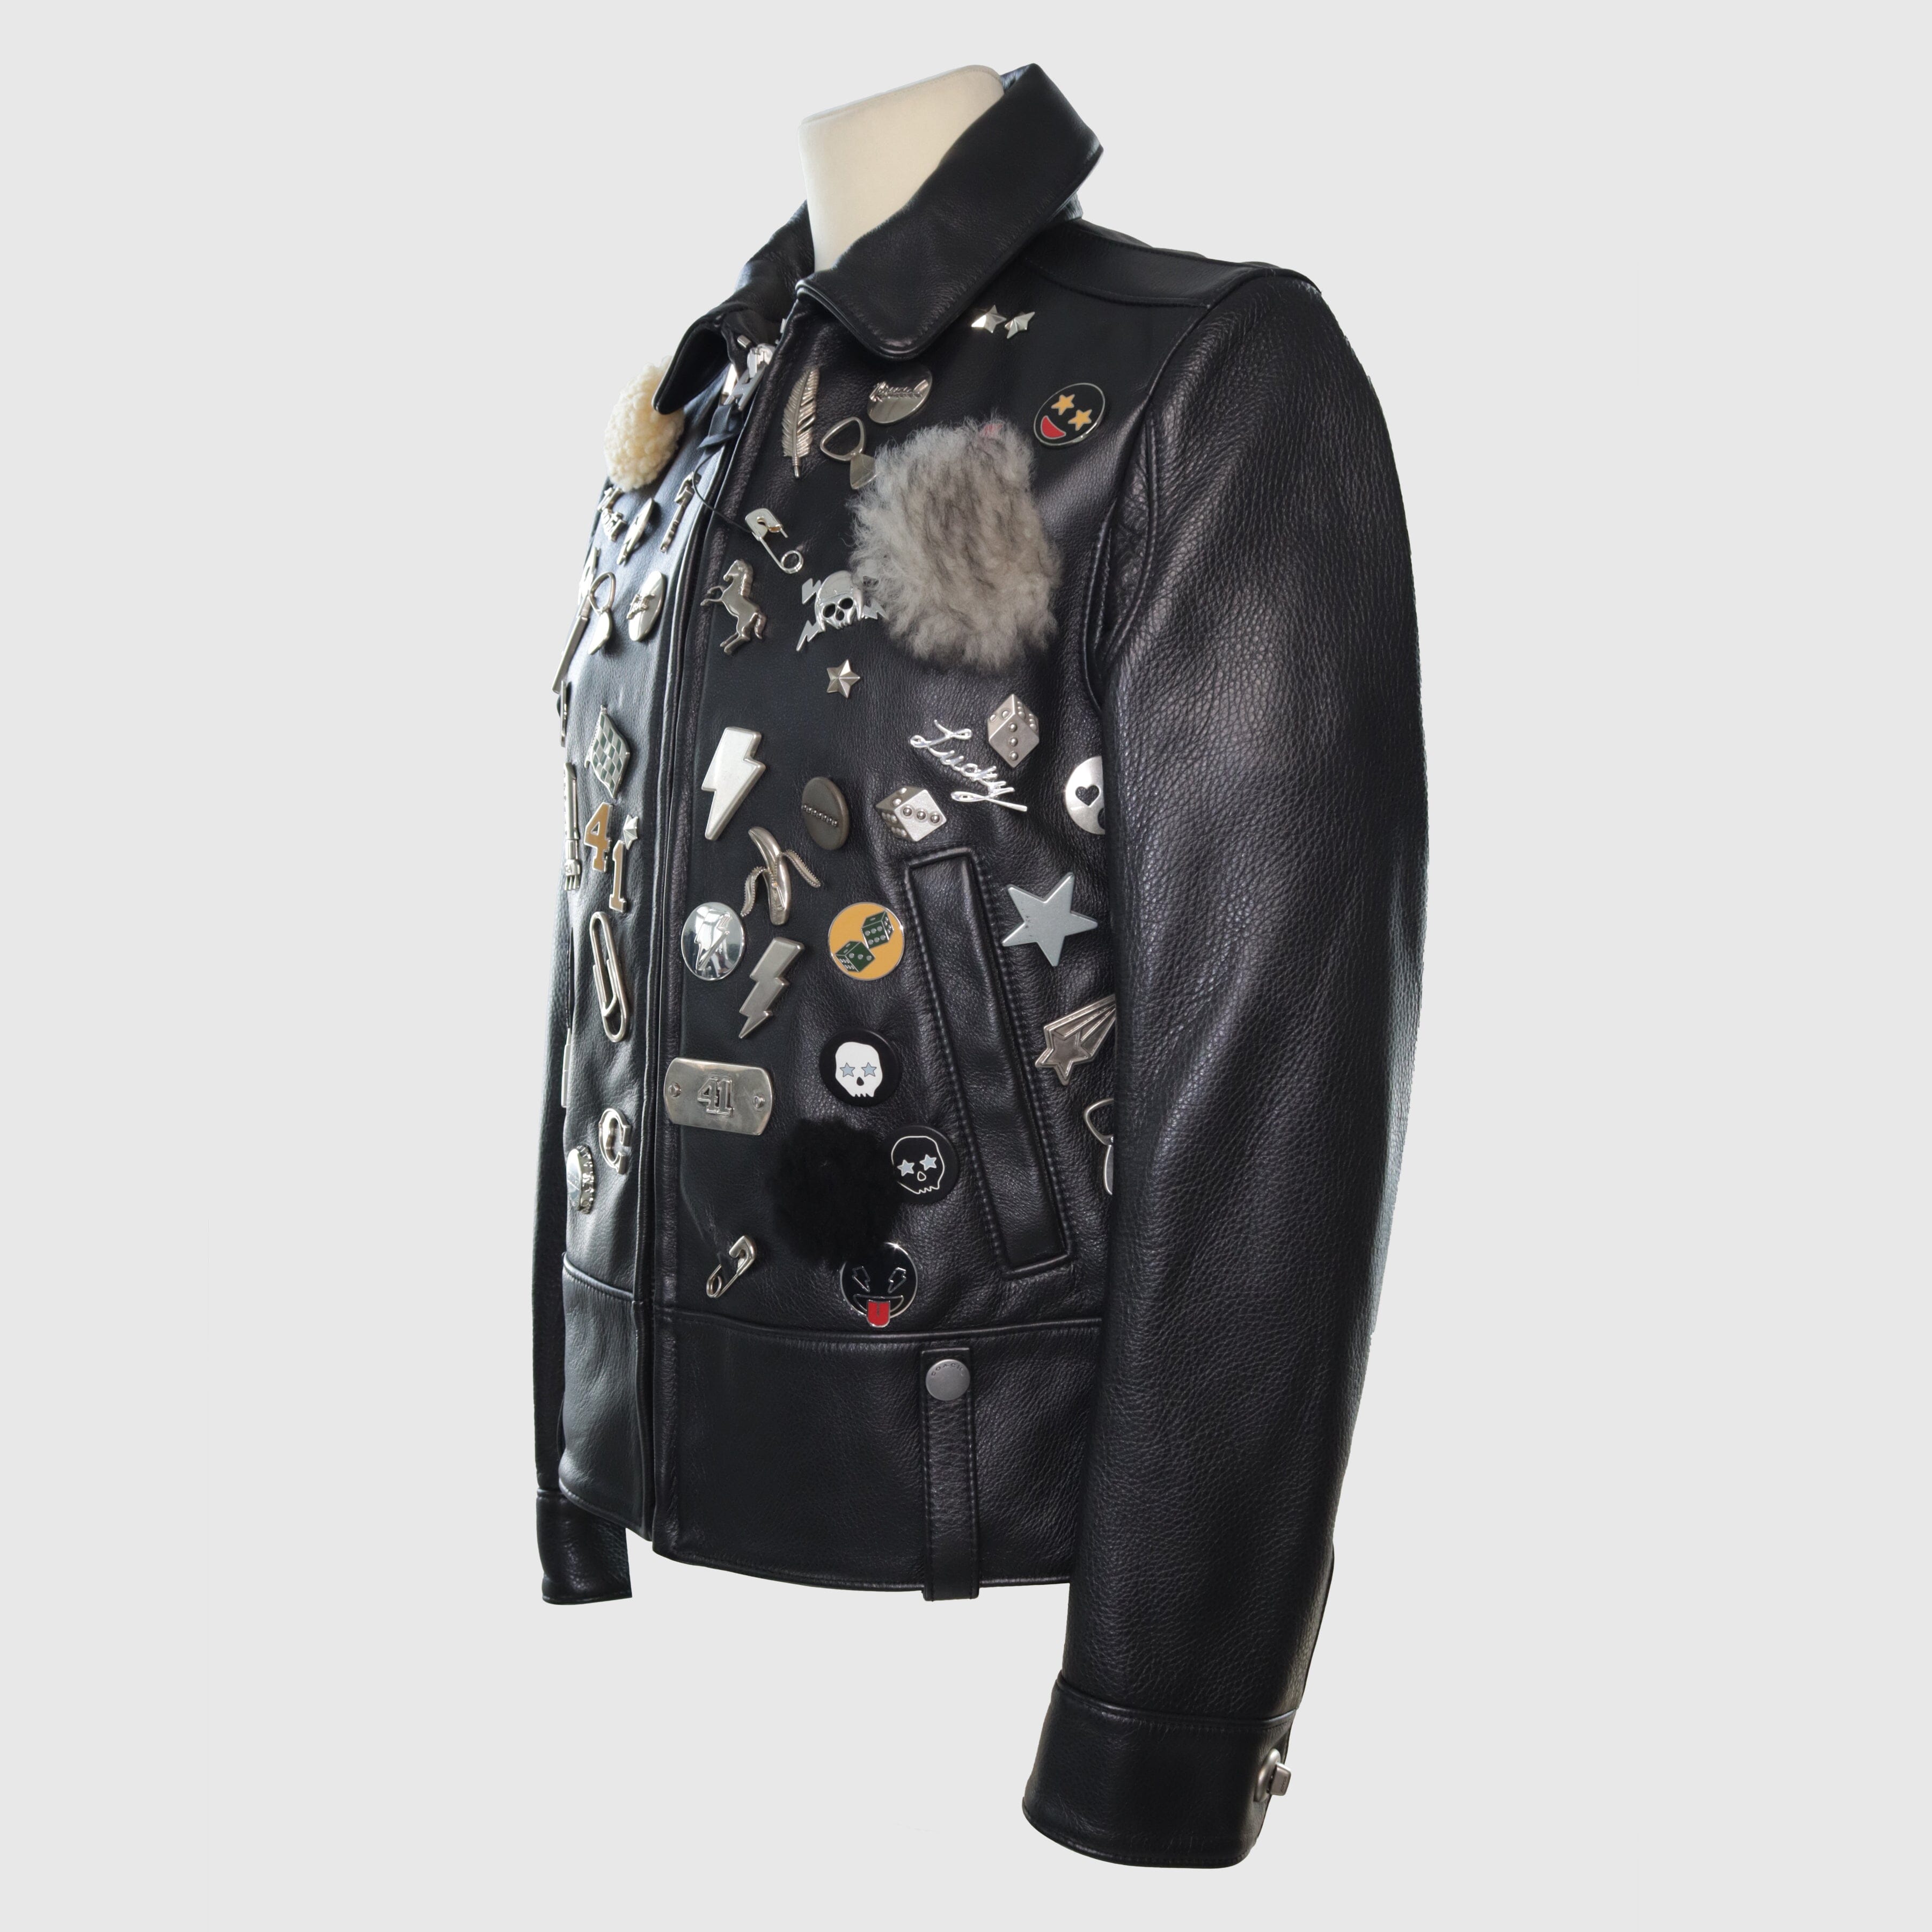 Black Forever Racer Pin Jacket Clothing Coach 